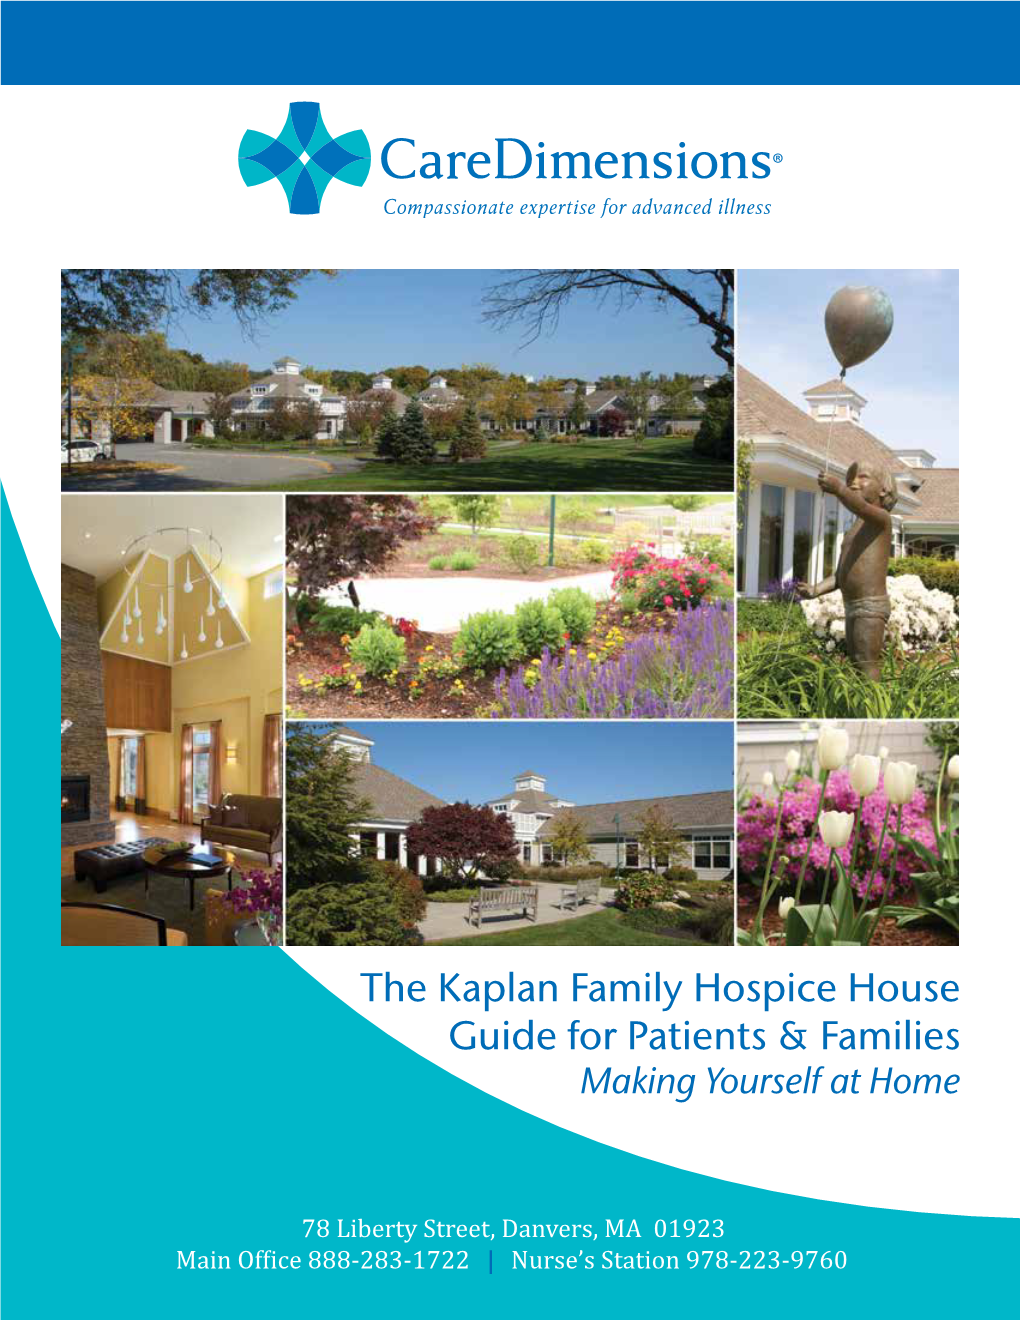 The Kaplan Family Hospice House Guide for Patients & Families